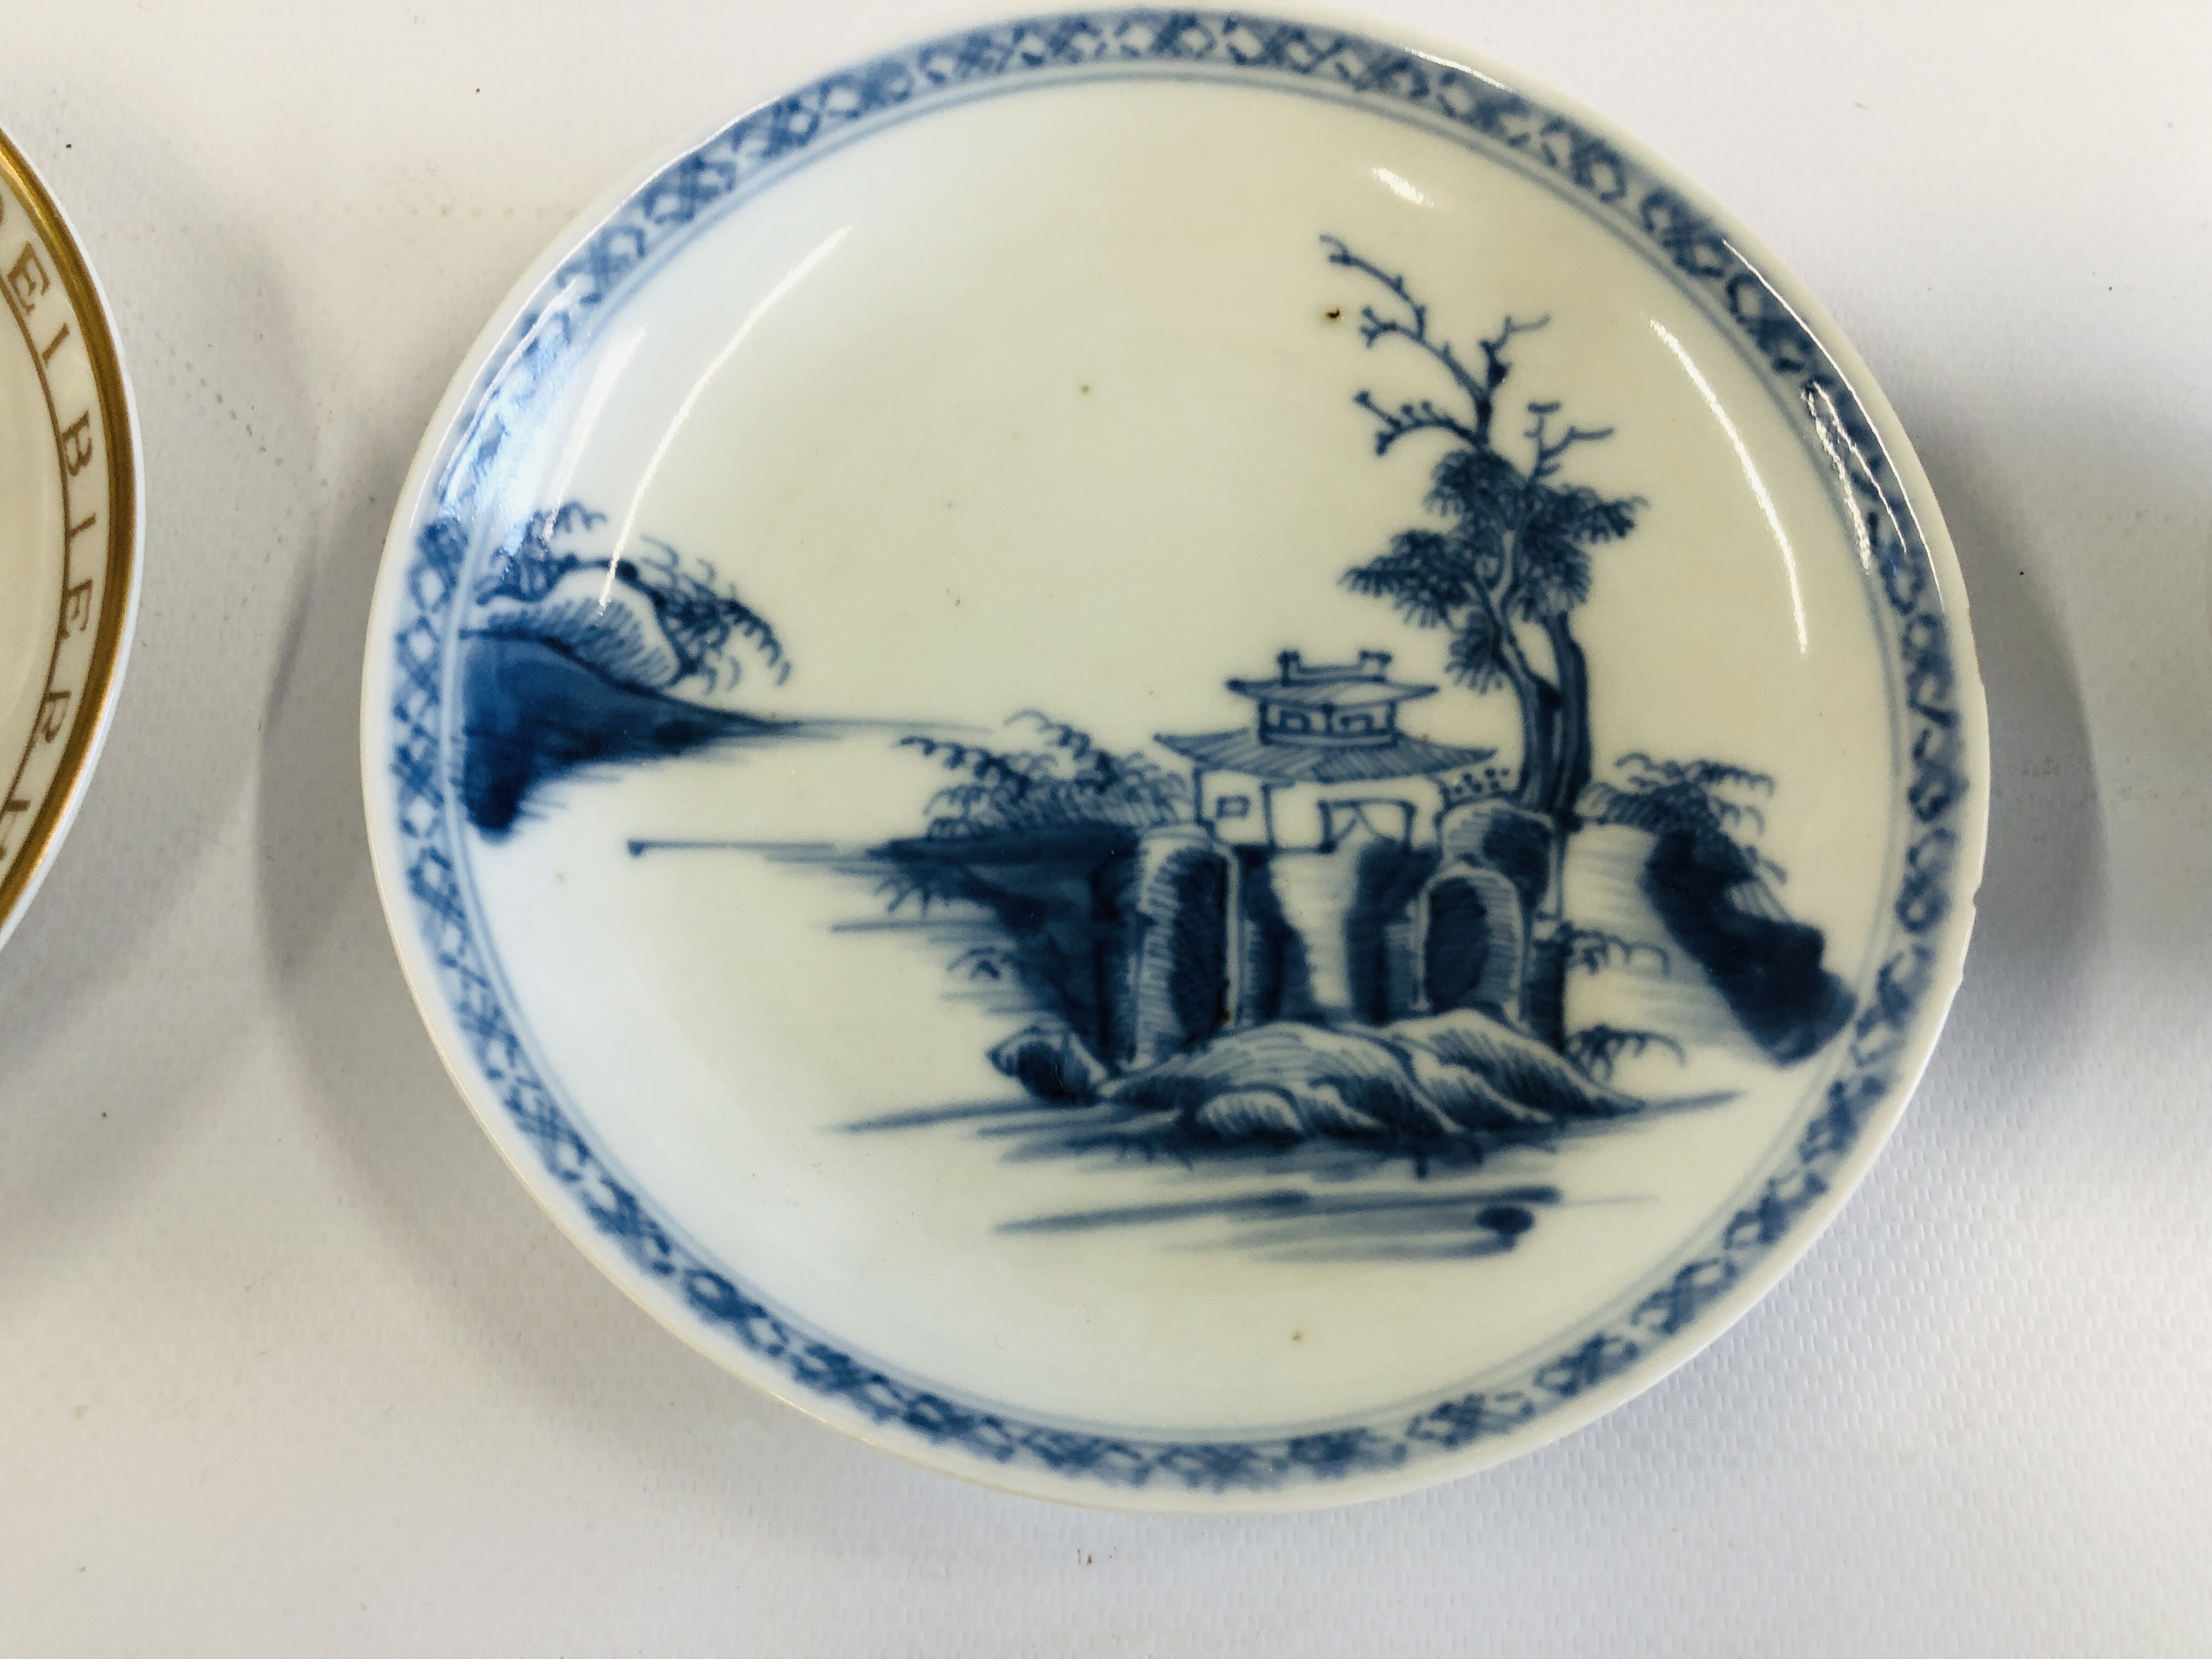 A NANKING CARGO ORIENTAL BLUE & WHITE TEA BOWL AND SAUCER (CHRISTIES 5066) ALONG WITH A LASKILL, - Image 4 of 8